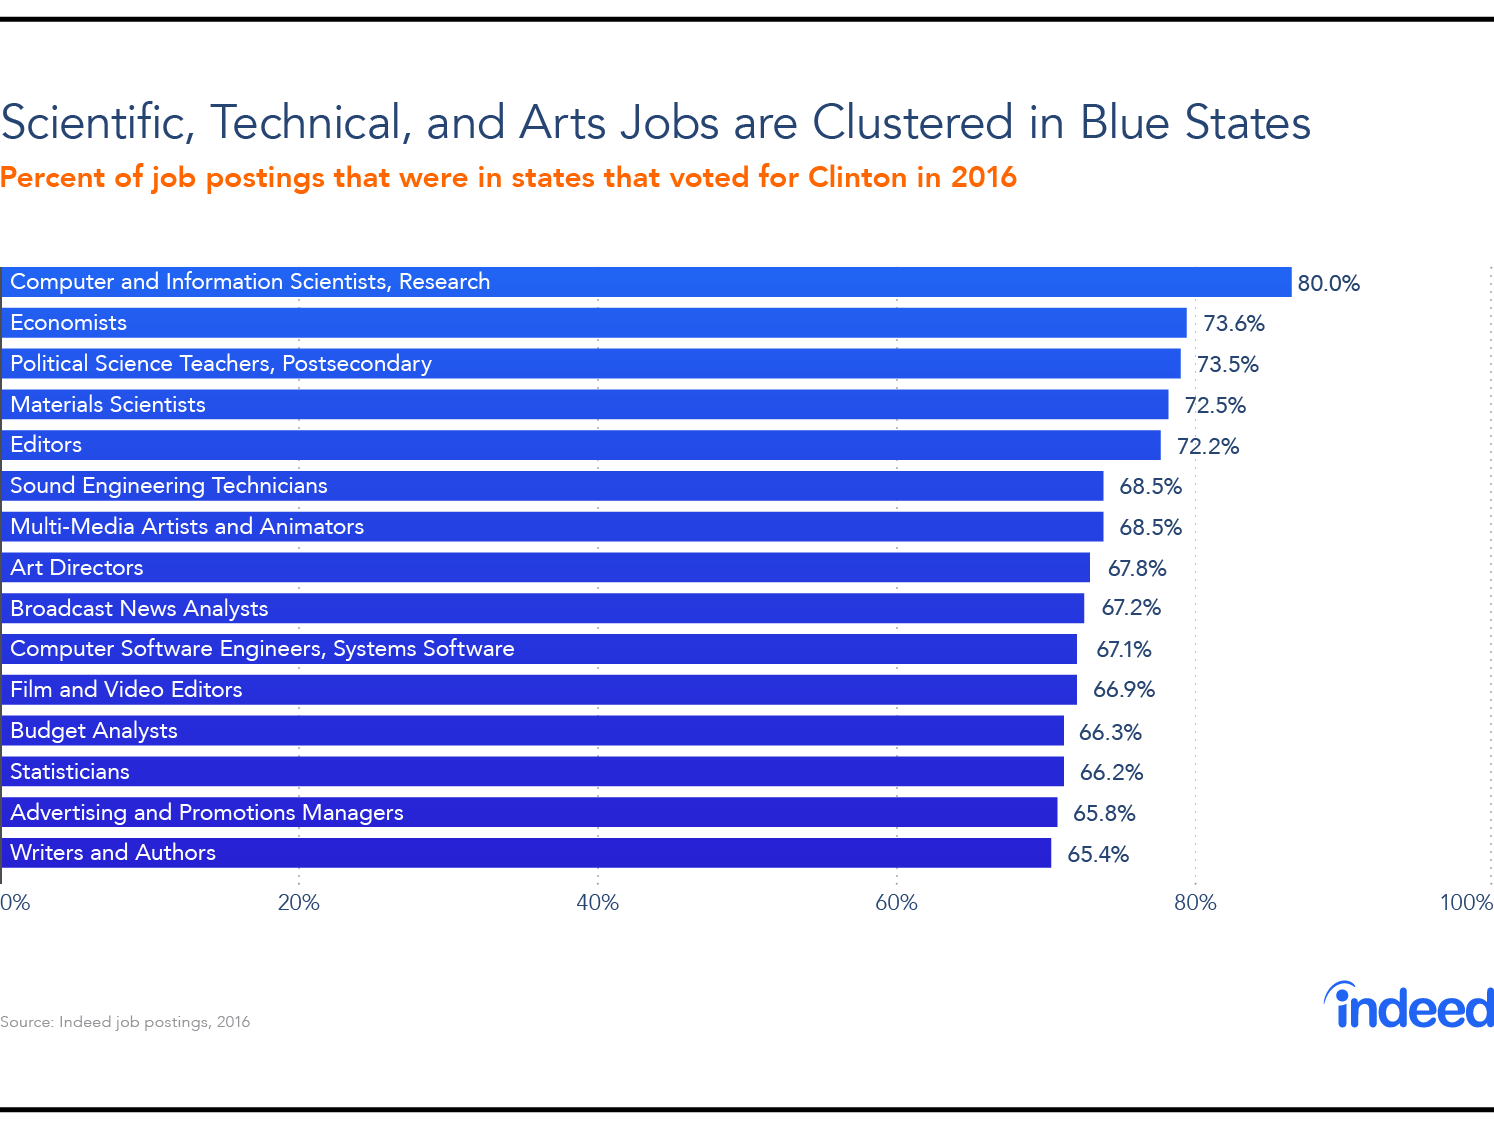 Scientific, technical, and arts jobs are clustered in blue states